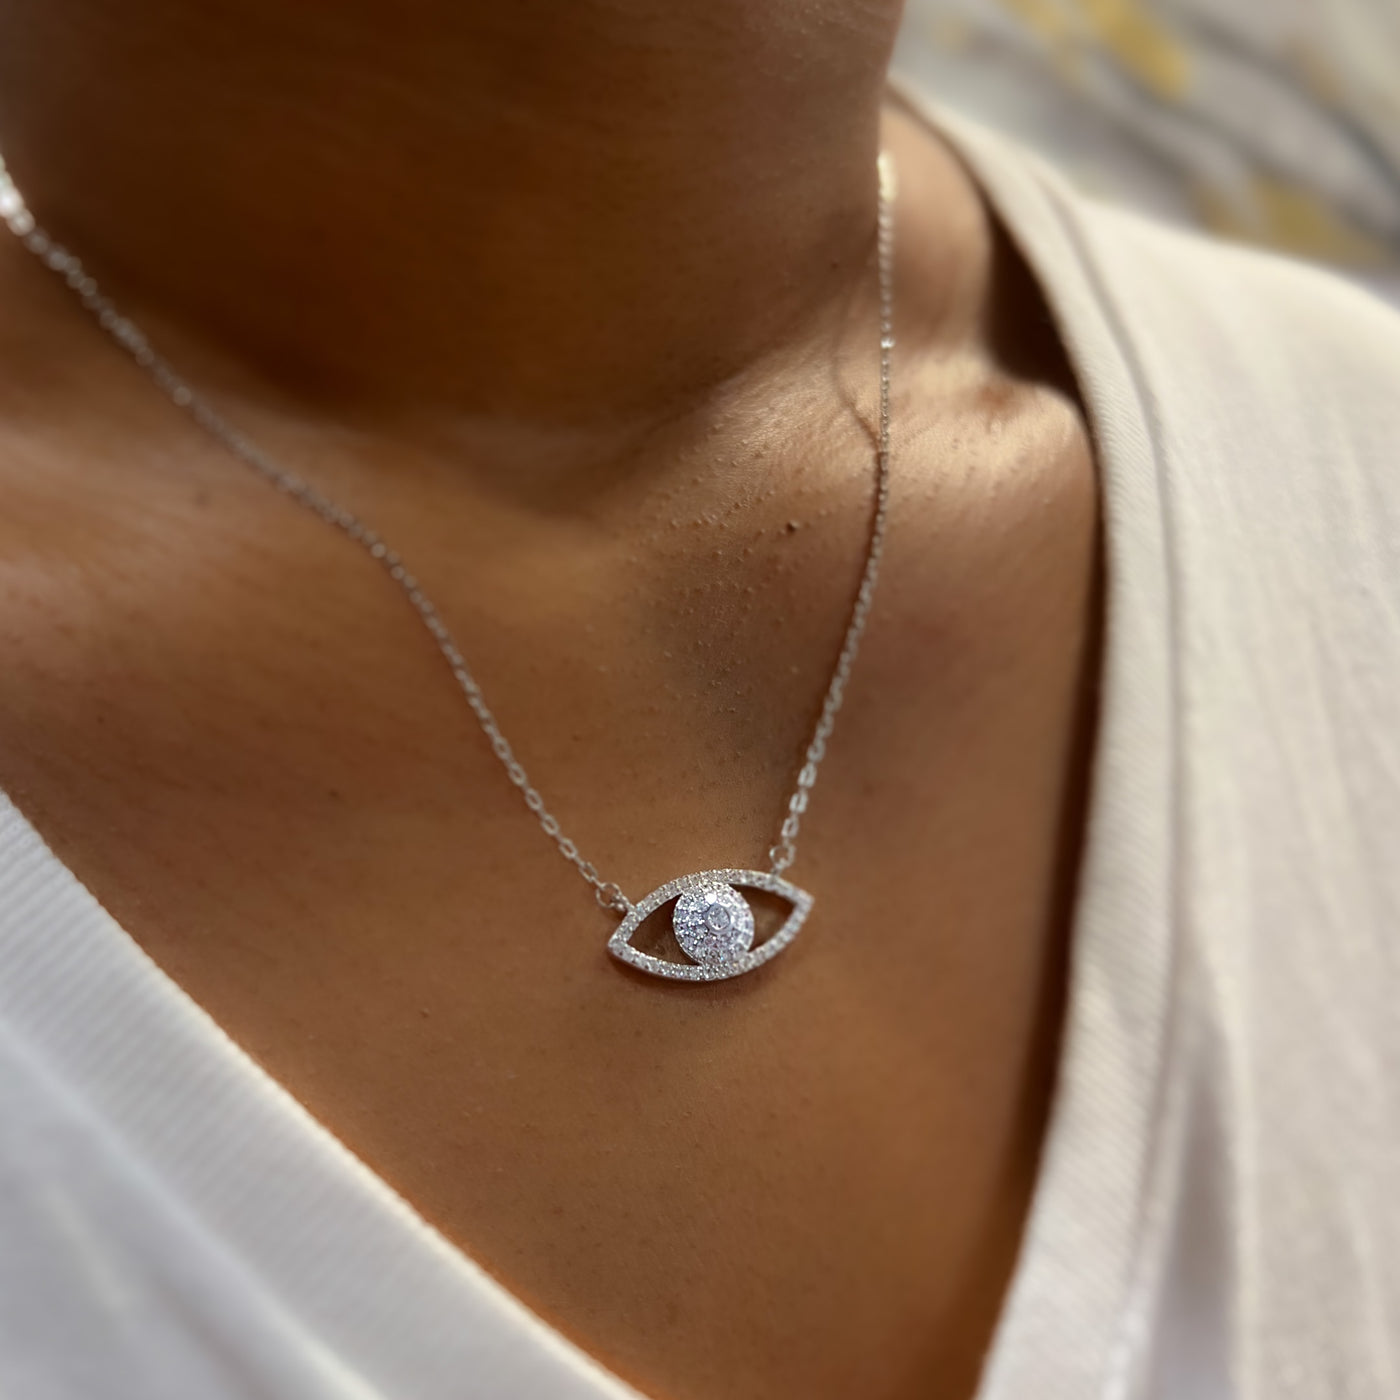 Protective Eye Sterling Silver Necklace